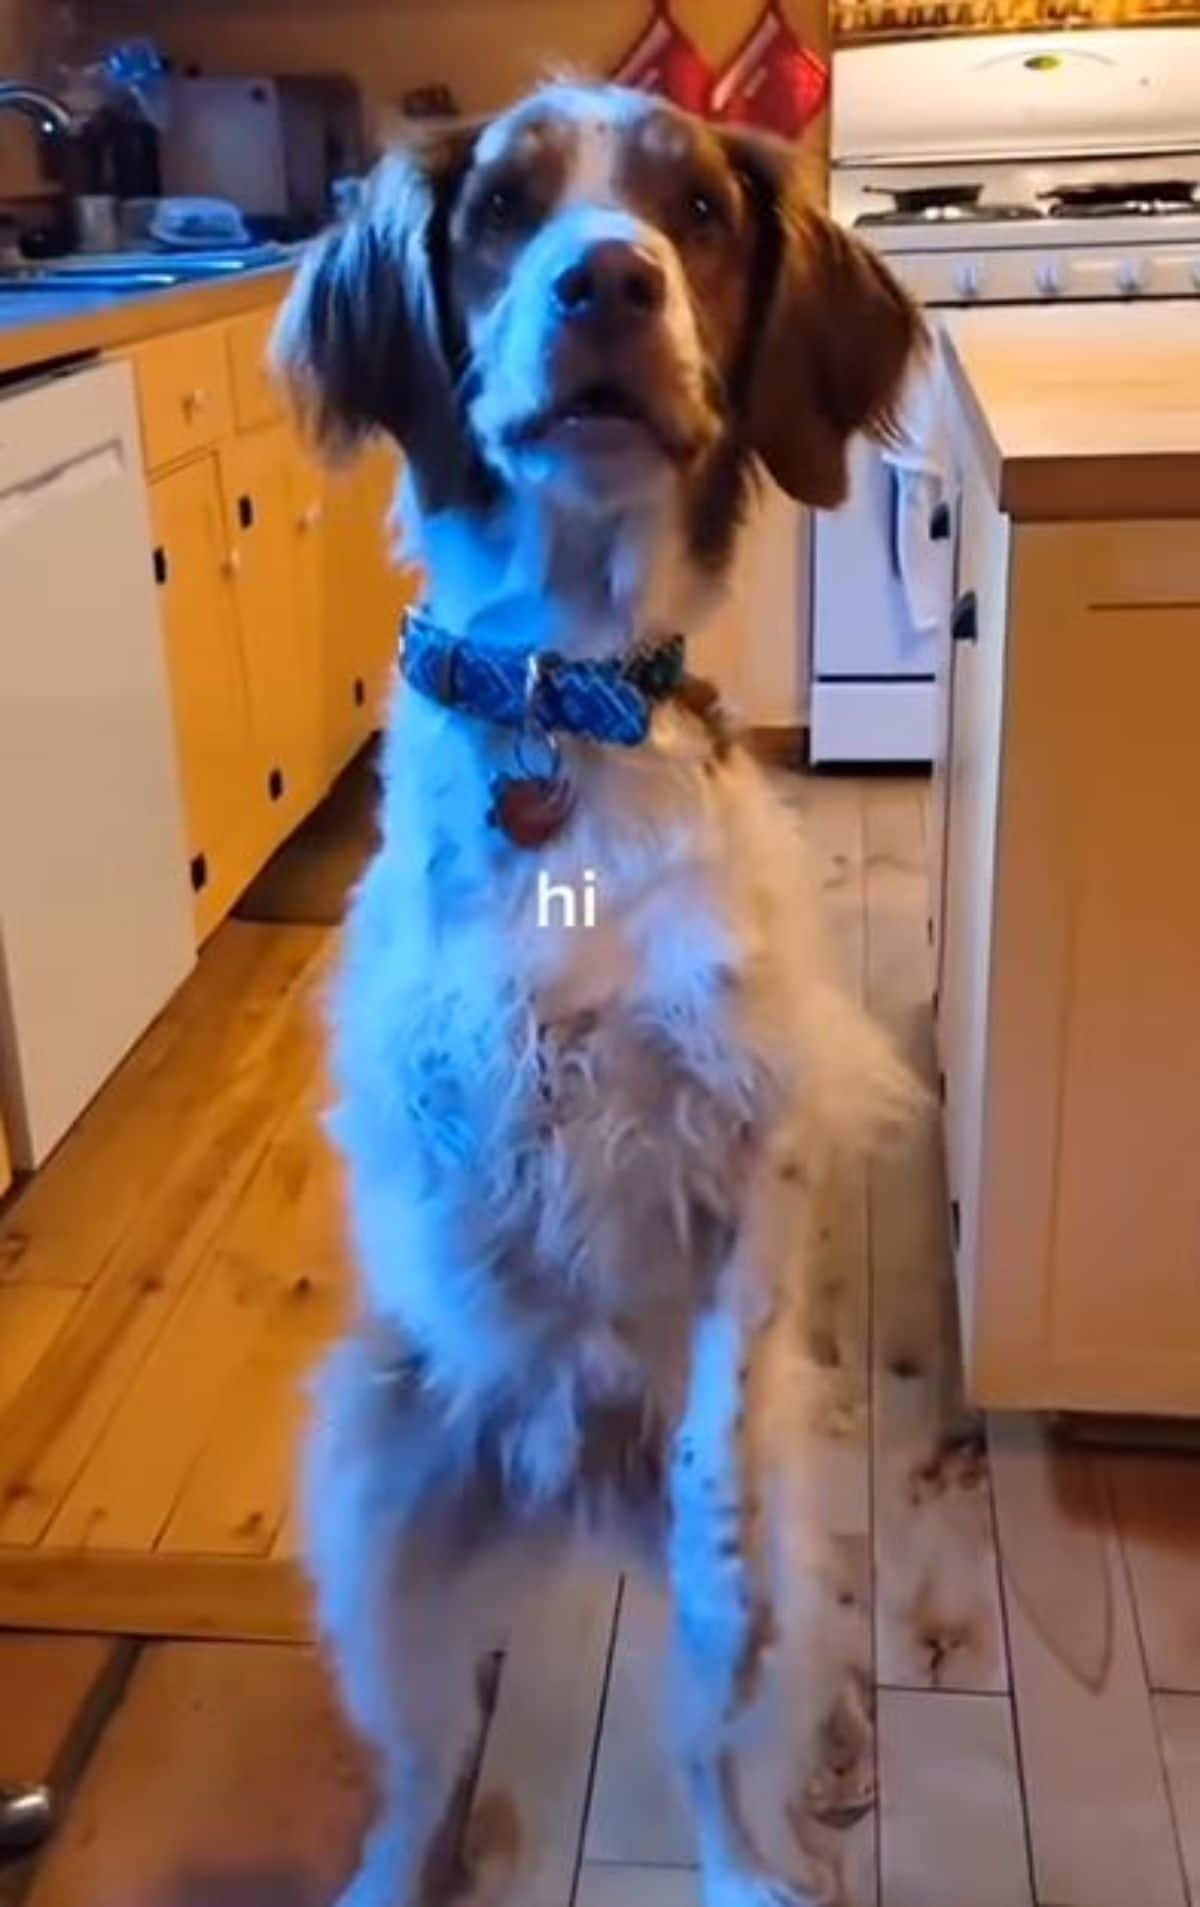 brown and white dog walking on hind legs and the photo has the word hi on it